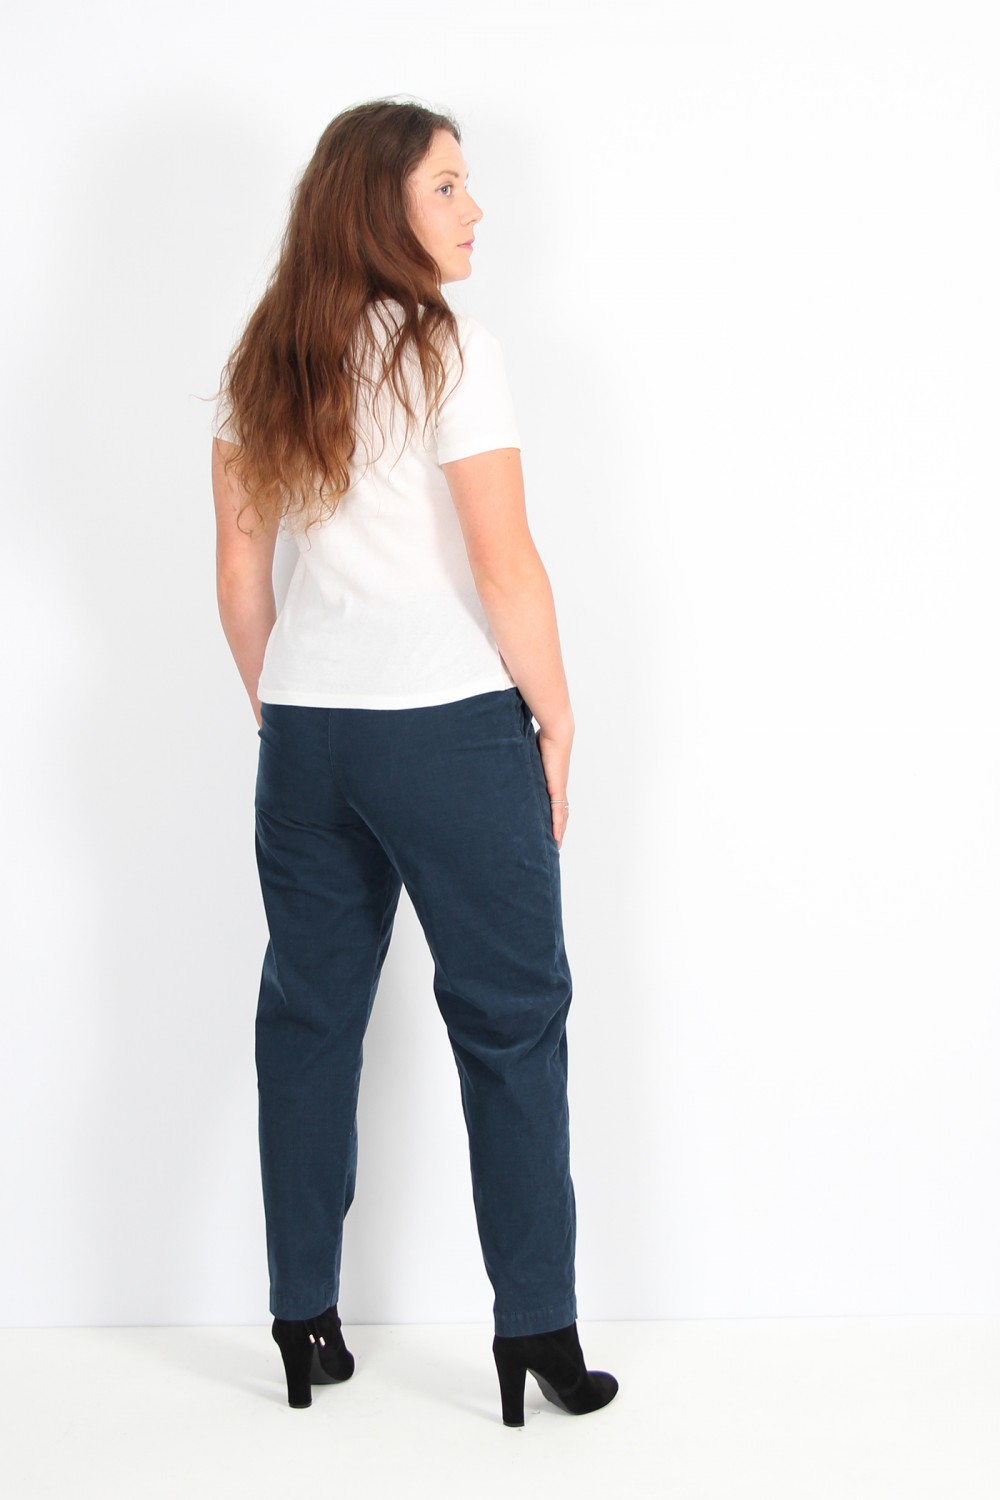 OSKA Trousers Minnima 310 Blue / Cotton cord with stretch content